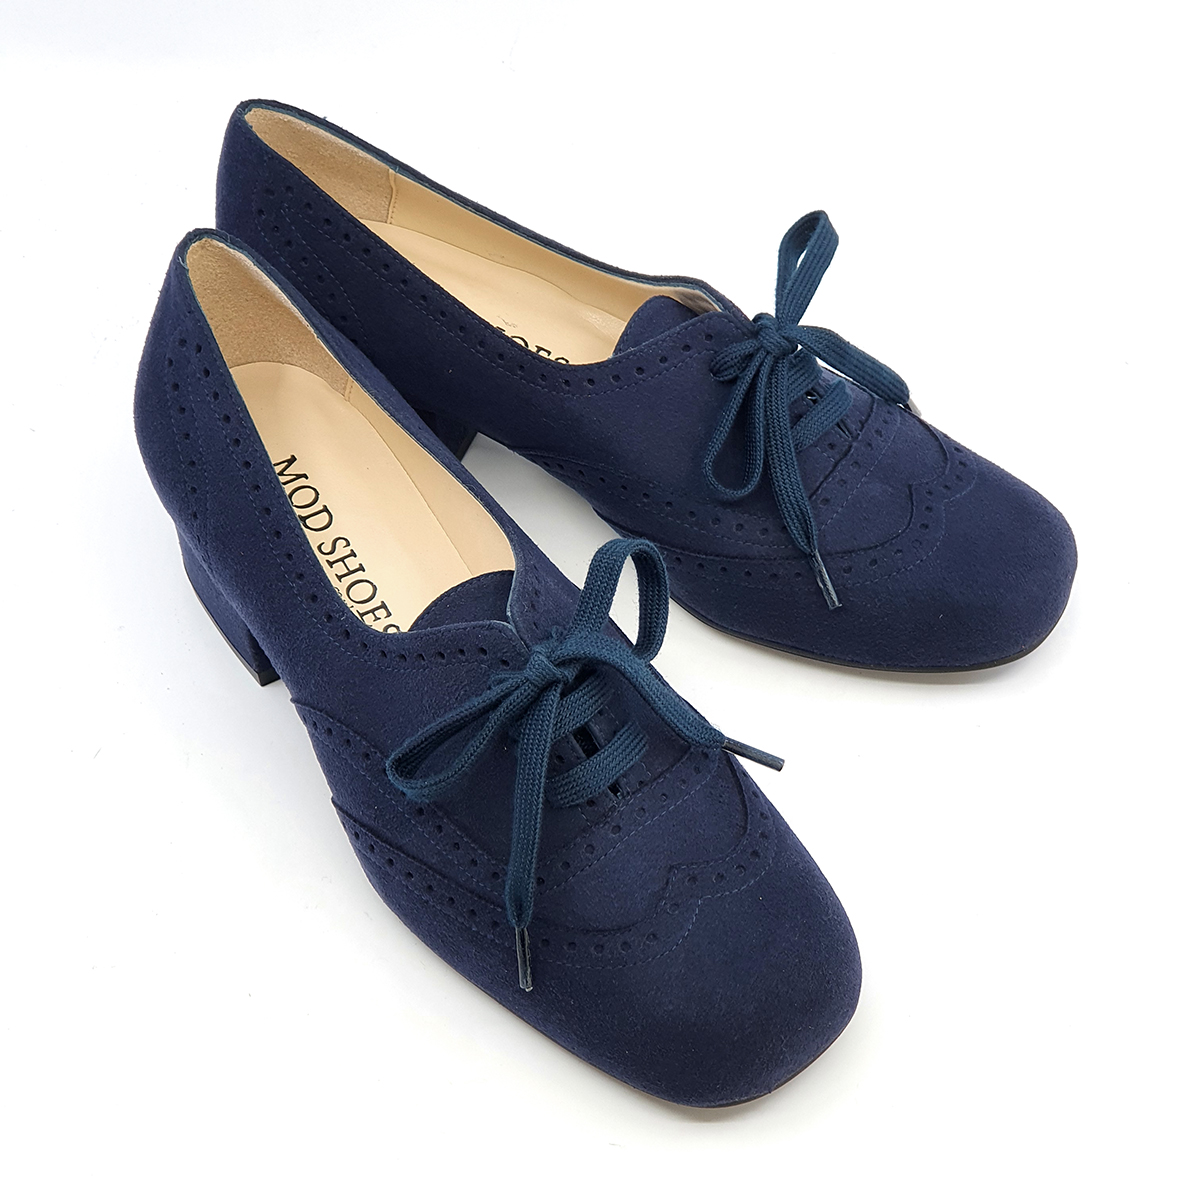 The Faye Brogue In Navy Blue Vegan Suede Effect- Vintage Style